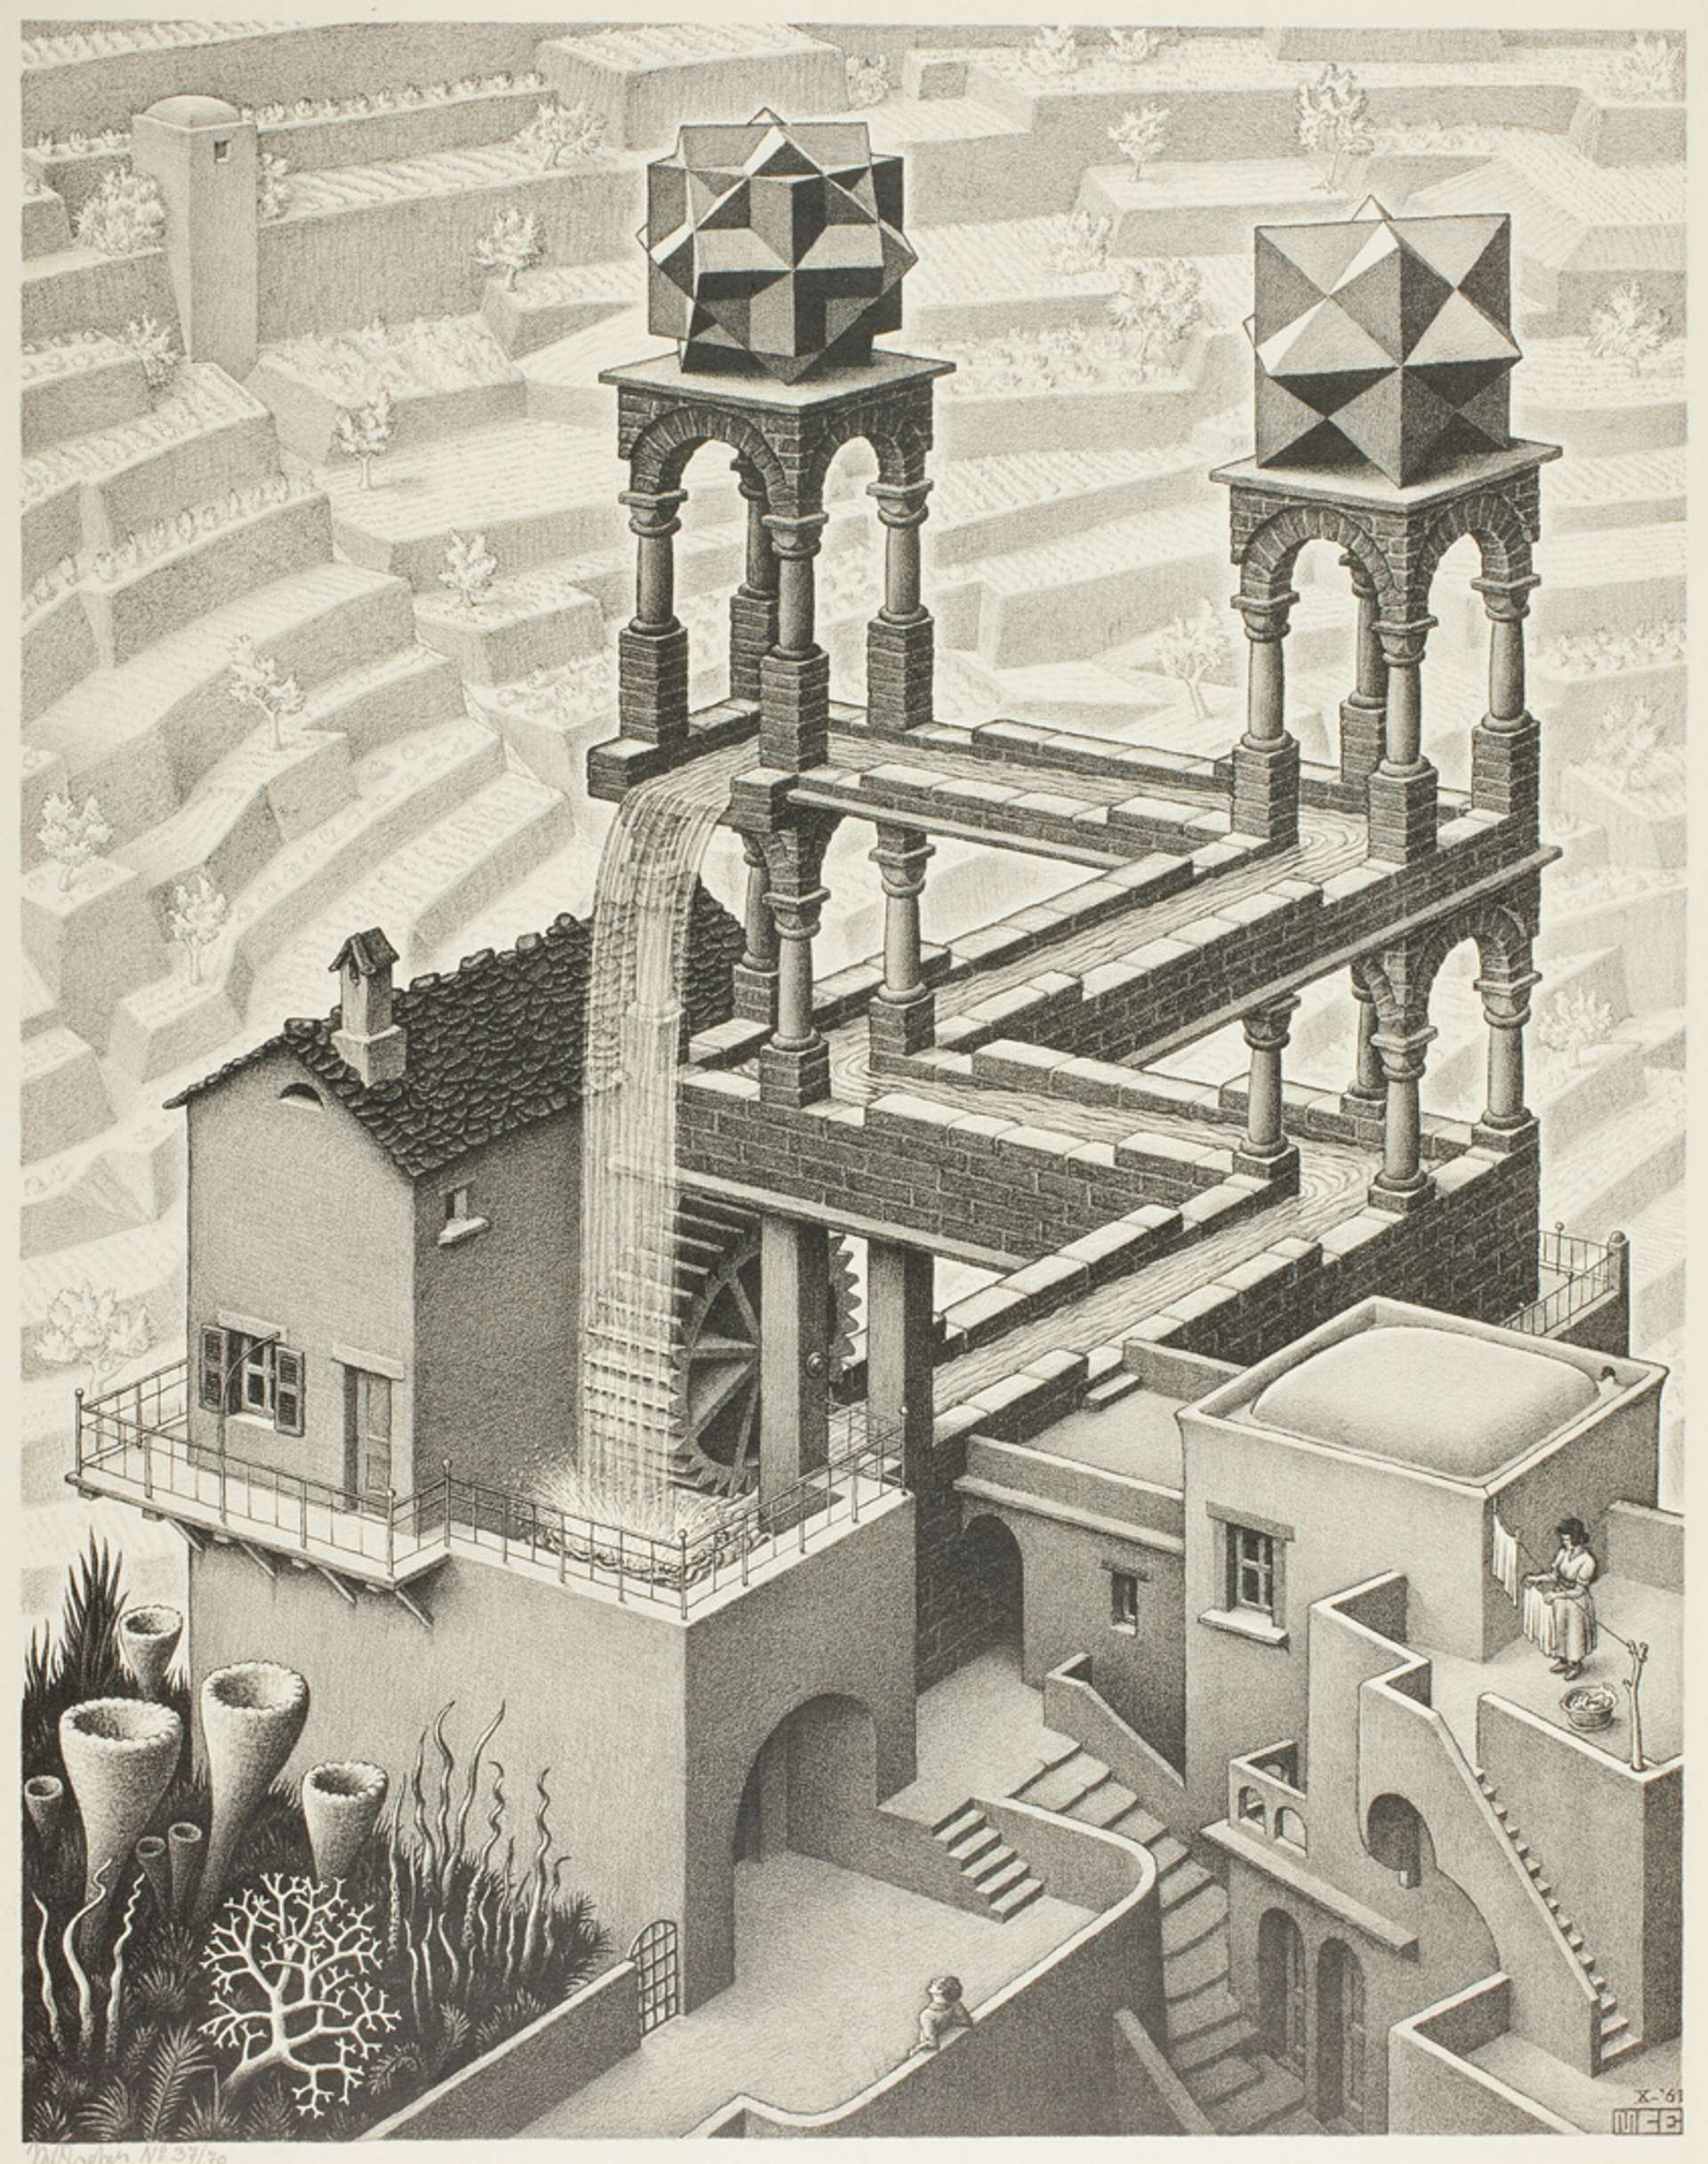 A lithograph titled "Waterfall" by M.C. Escher, depicting a continuous waterfall flowing upwards in a perpetual motion, defying the laws of gravity.